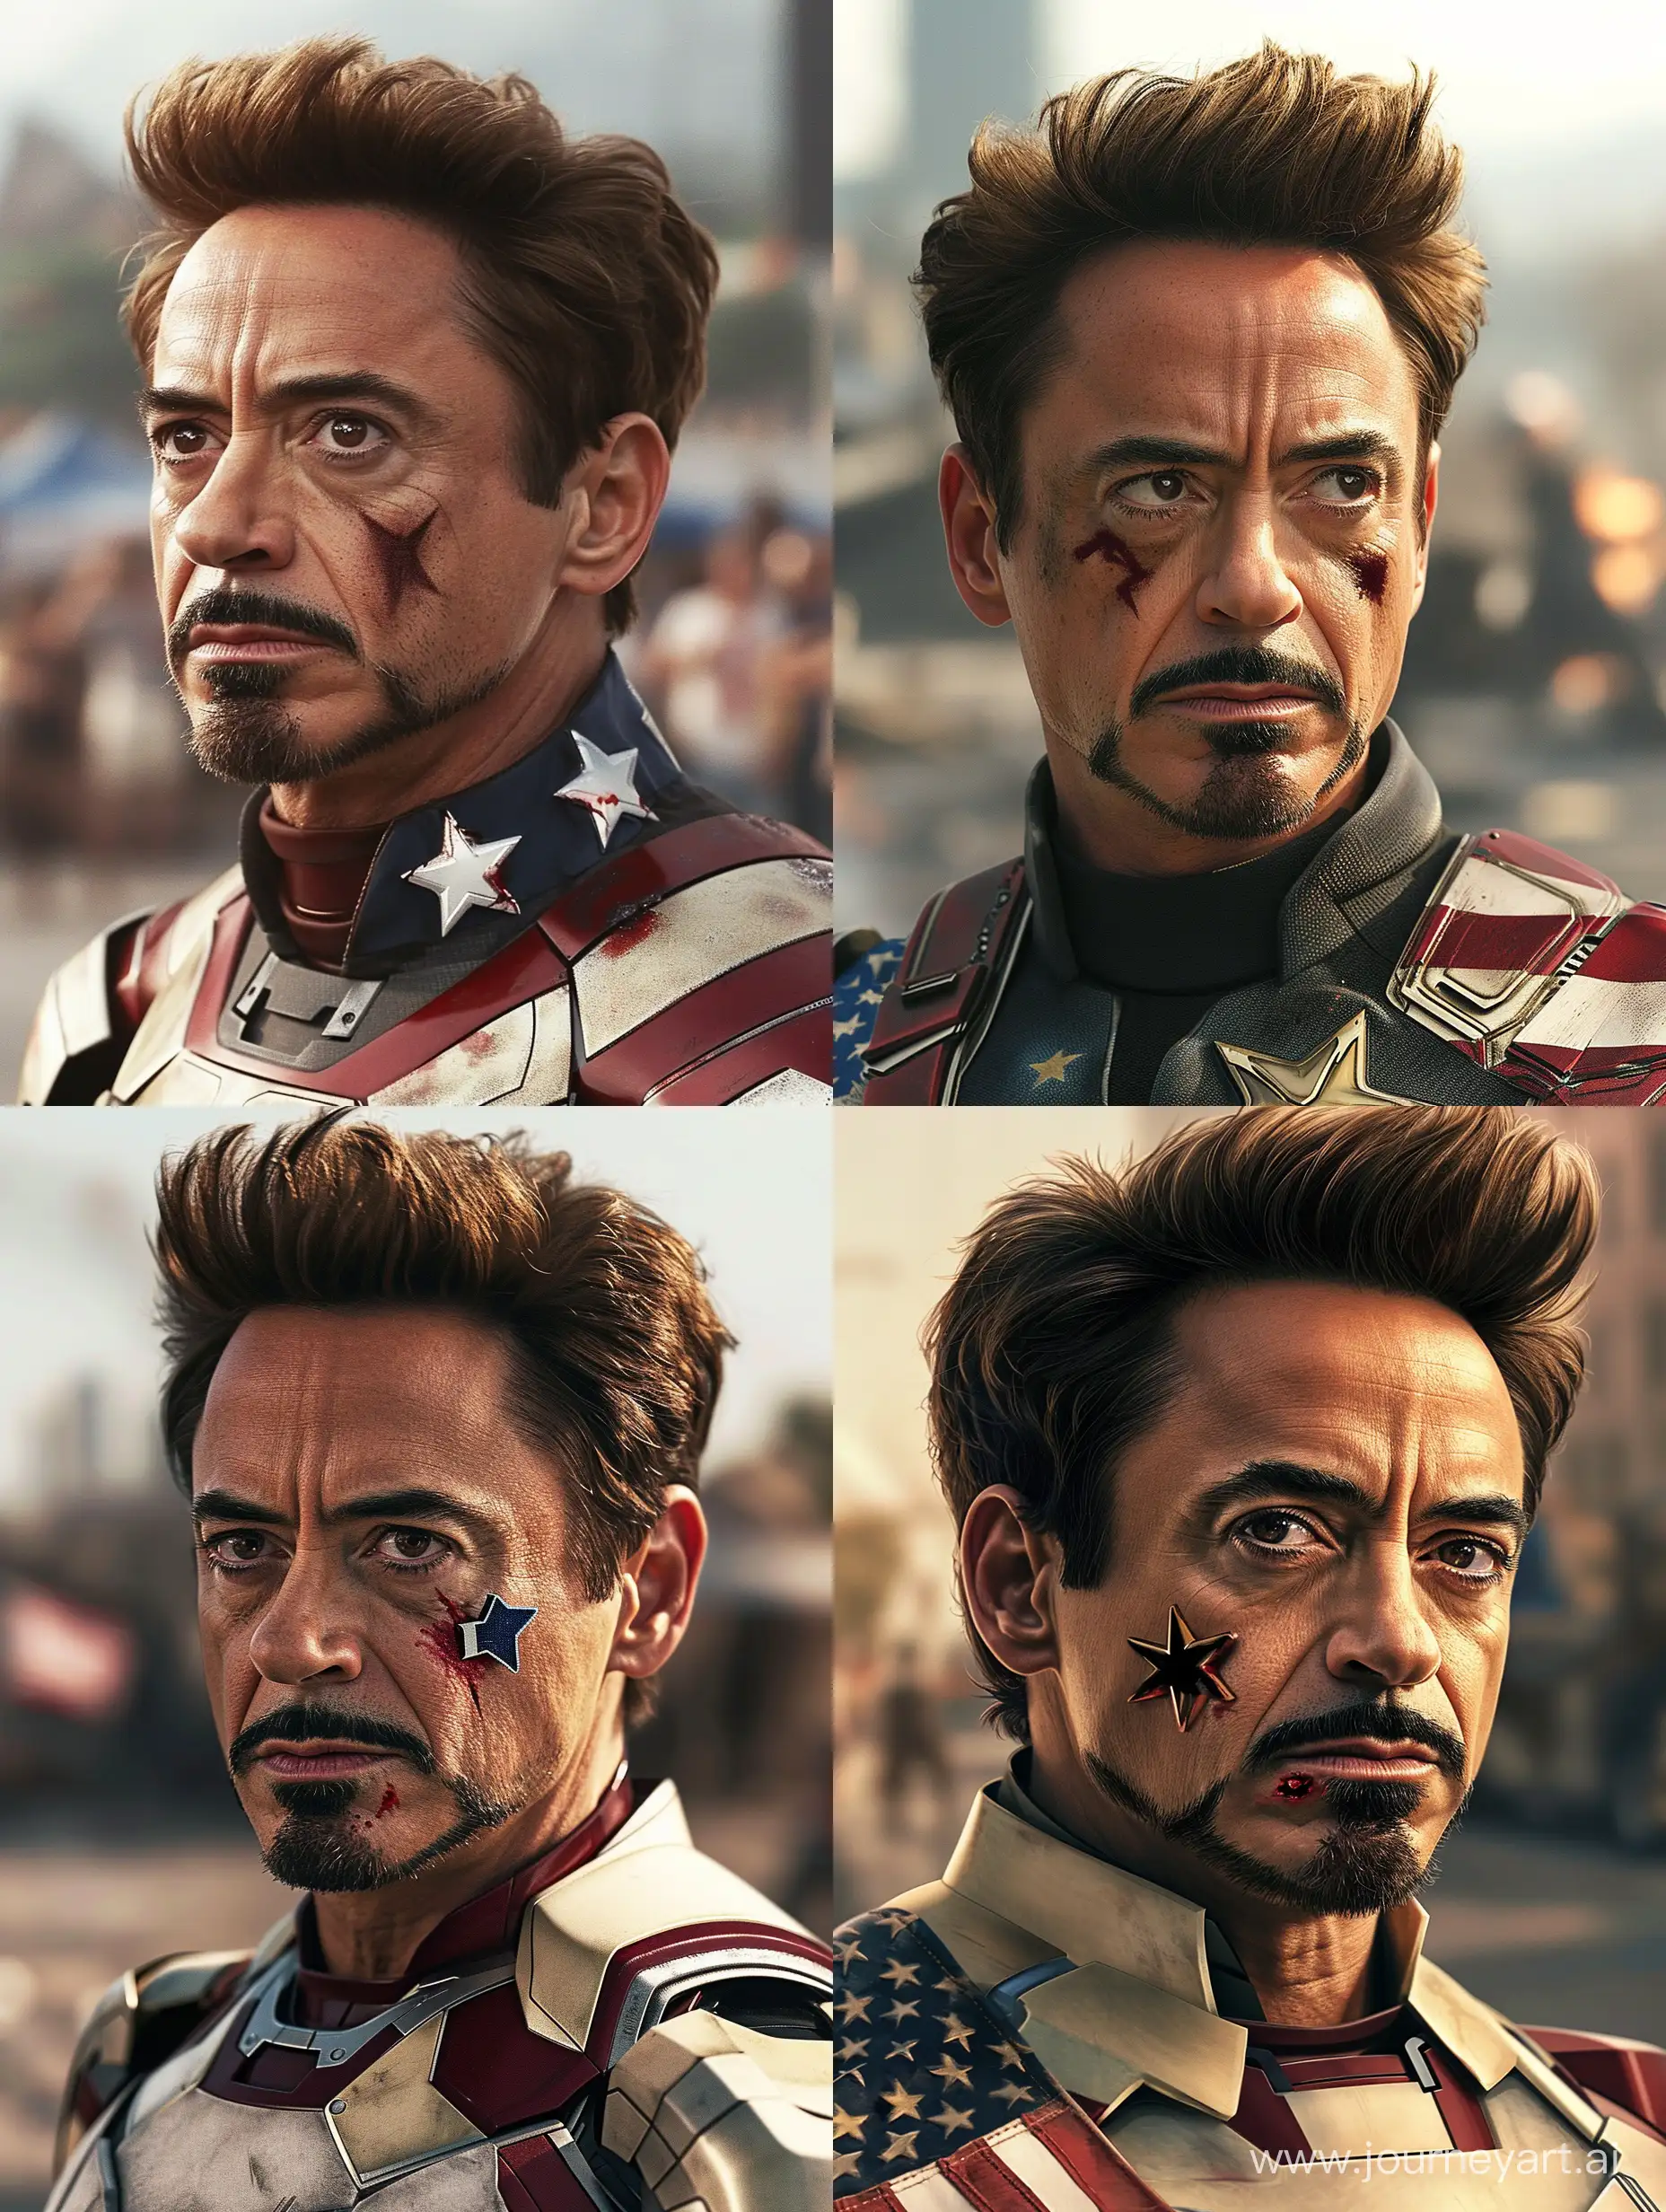 The image features Robert Downey Jr. as Tony Stark, looking determined with his hair styled in a quiff. He has a star-shaped badge on his costume, which is adorned with an American flag. He has a black mustache and a star-shaped bruise on his right cheek. The background shows a blurred cityscape.